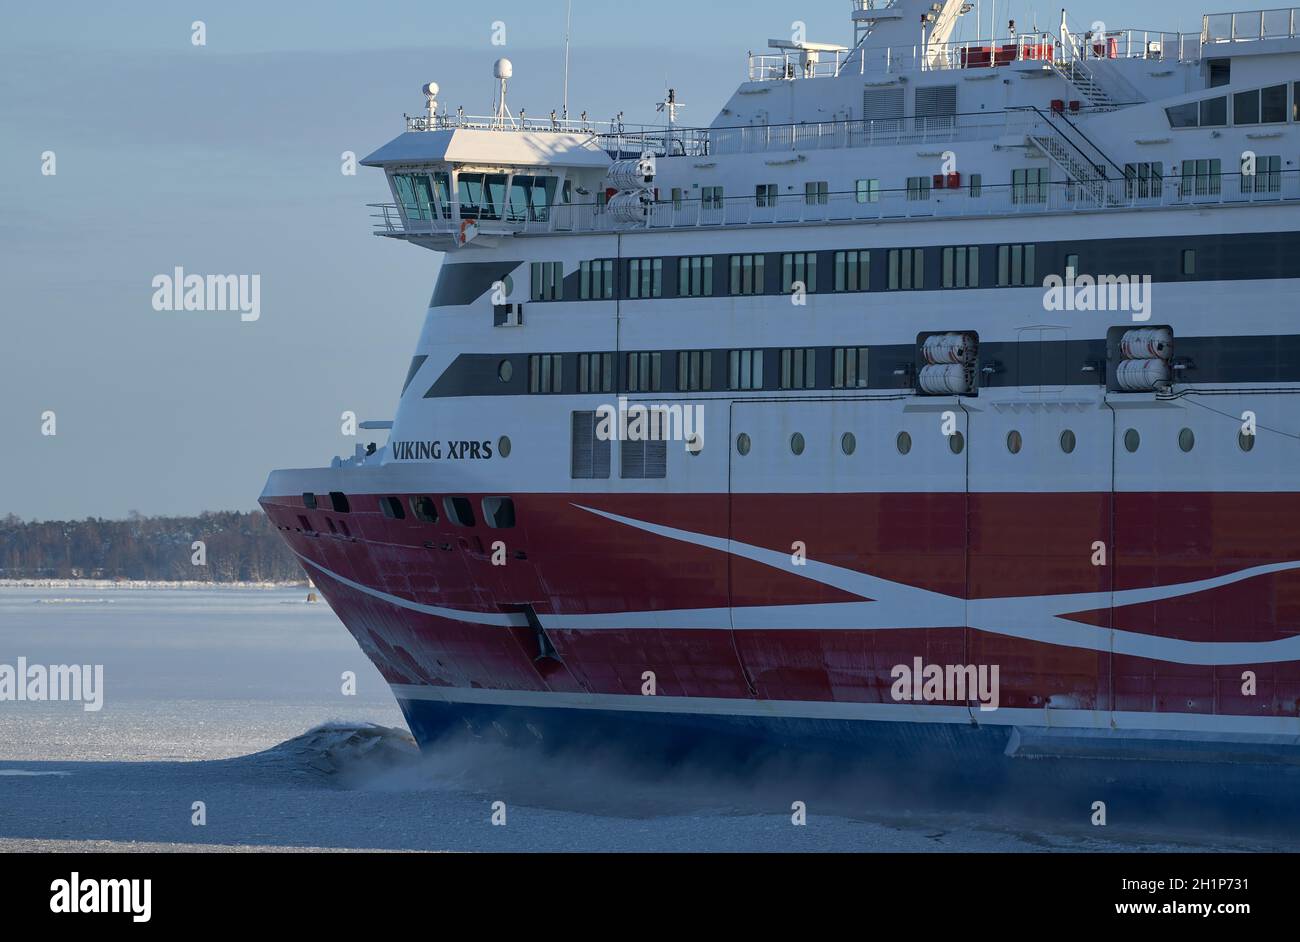 Helsinki, Finland - January 15, 2021: M/S Viking XPRS ferry arriving to Helsinki from Tallinn in extremely cold winter conditions. Stock Photo